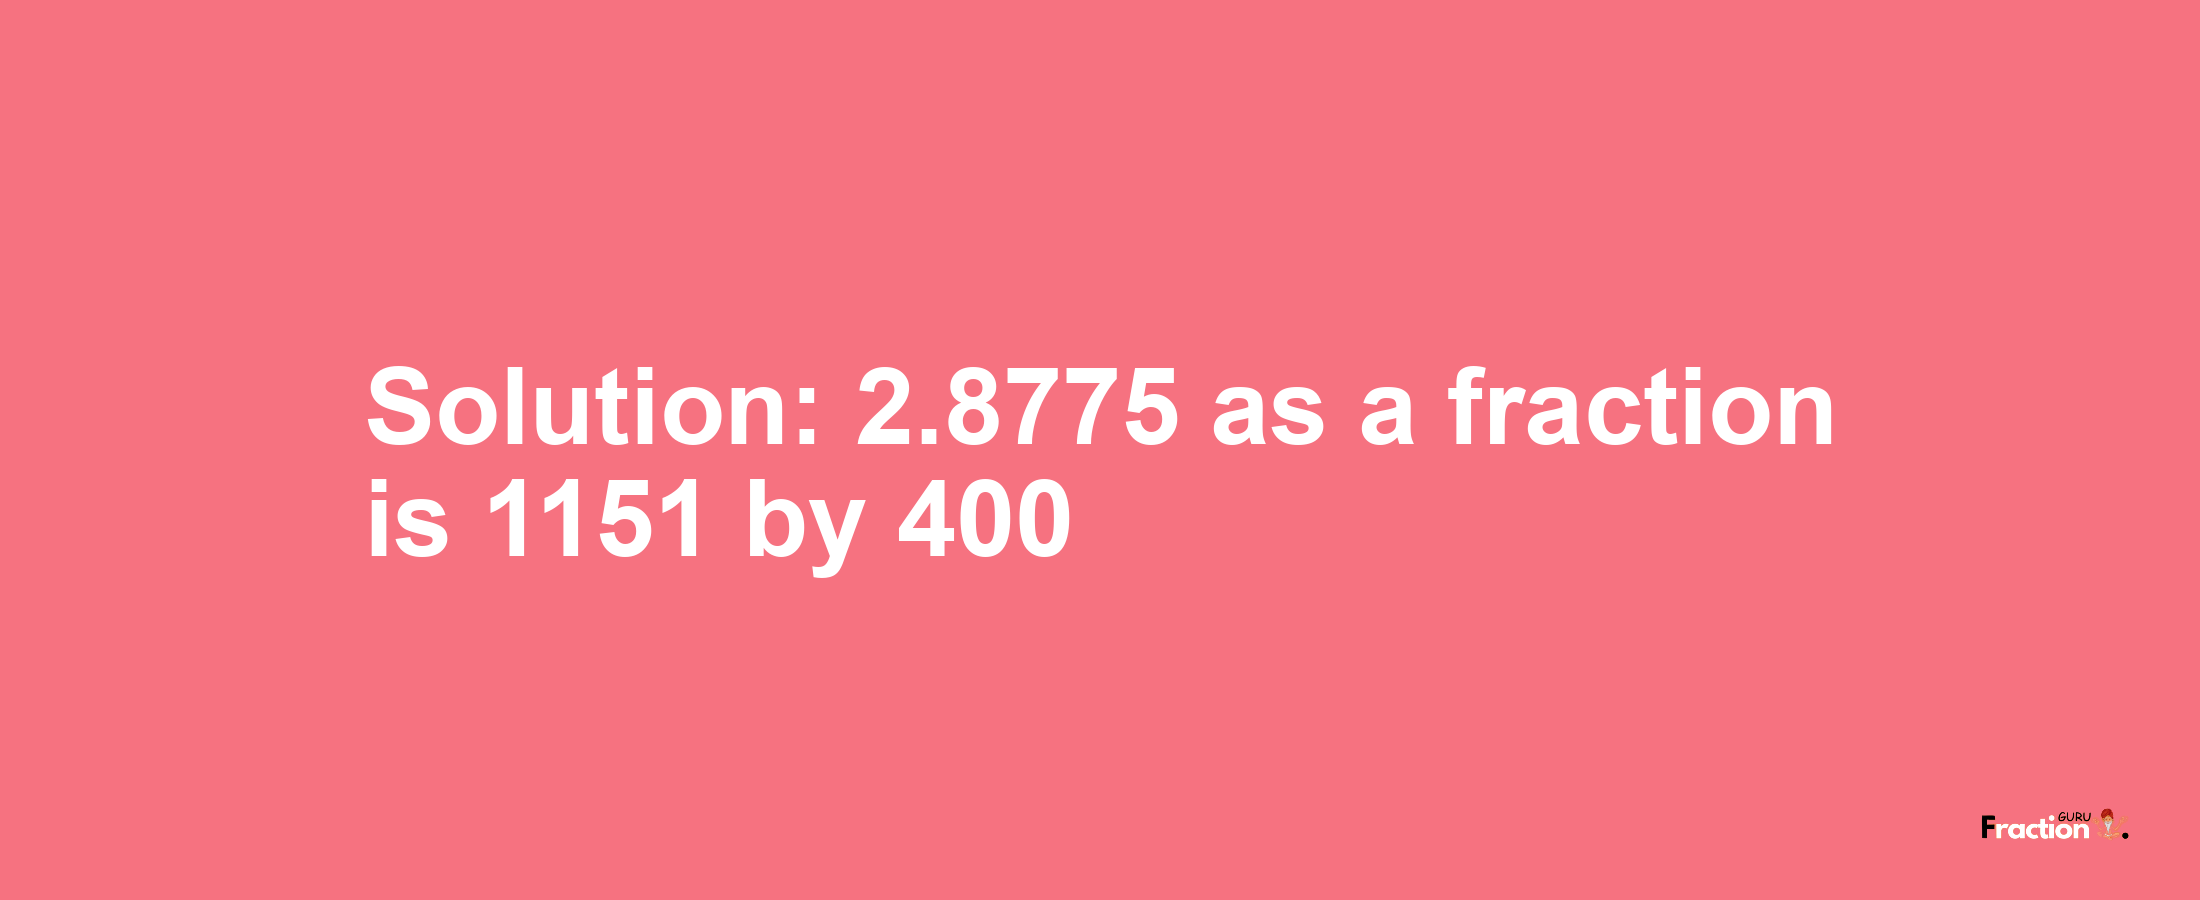 Solution:2.8775 as a fraction is 1151/400